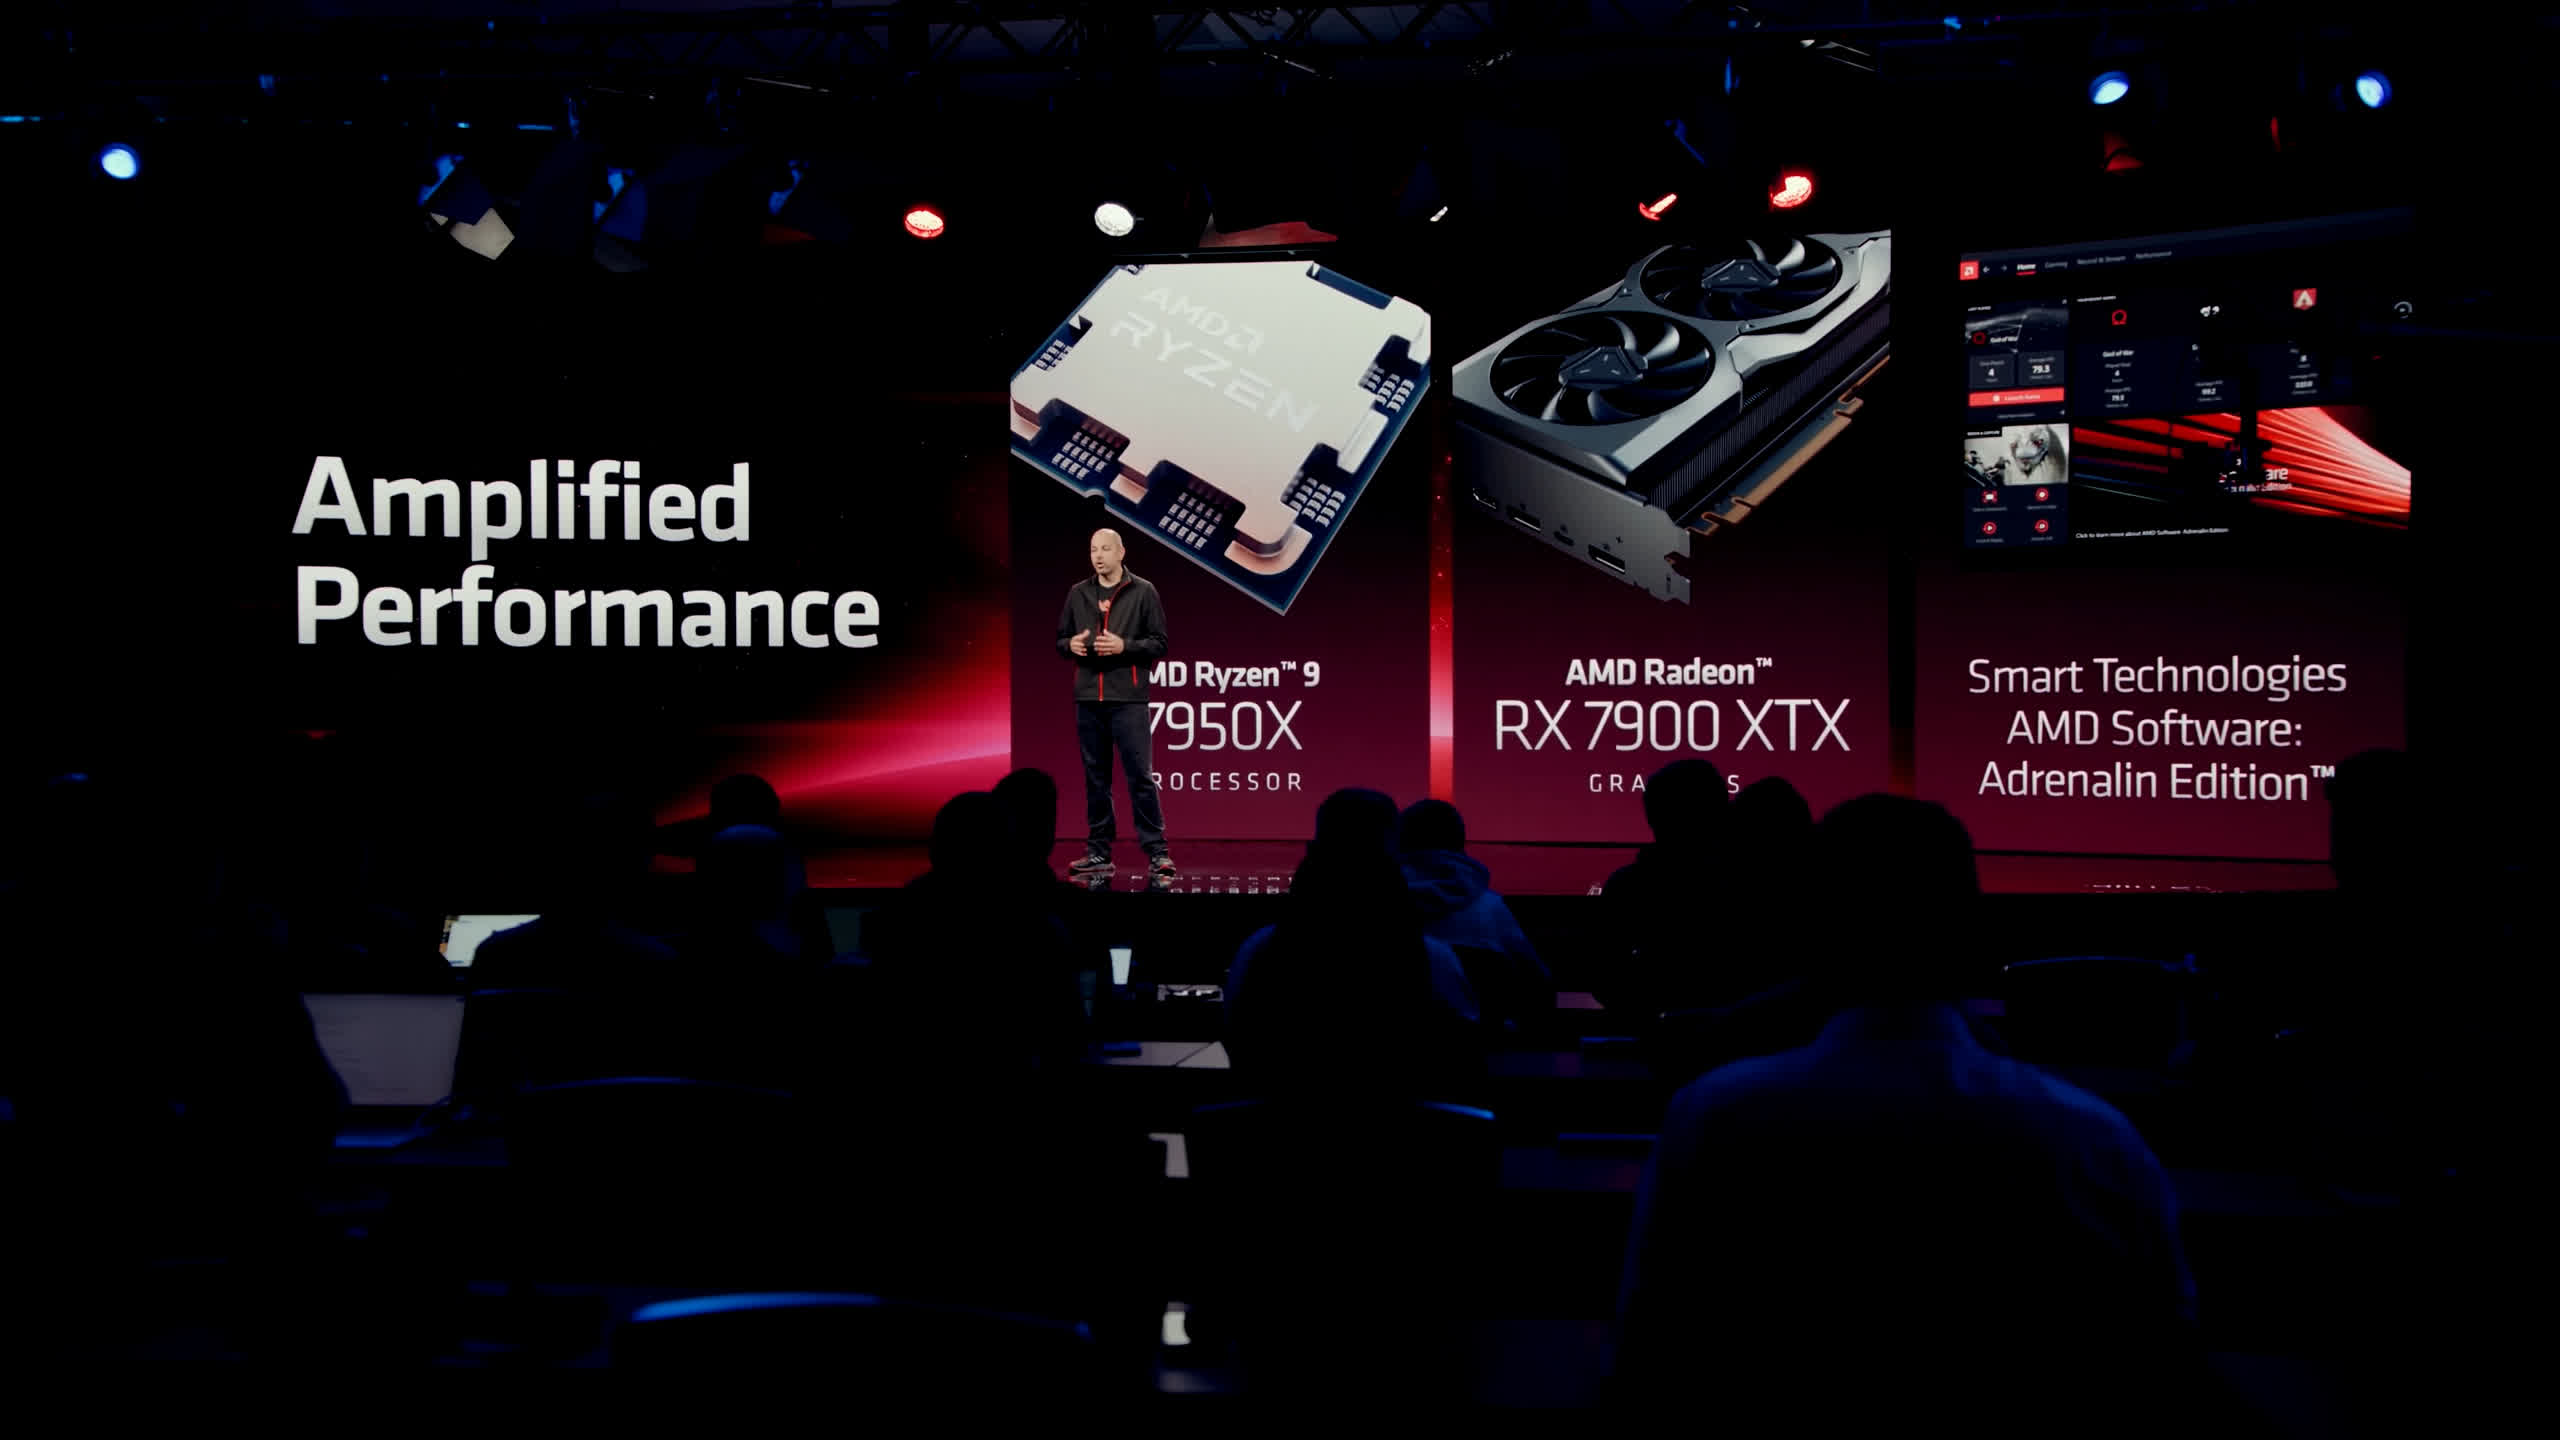 AMD Advantage arrives on desktops along with new performance boosting features